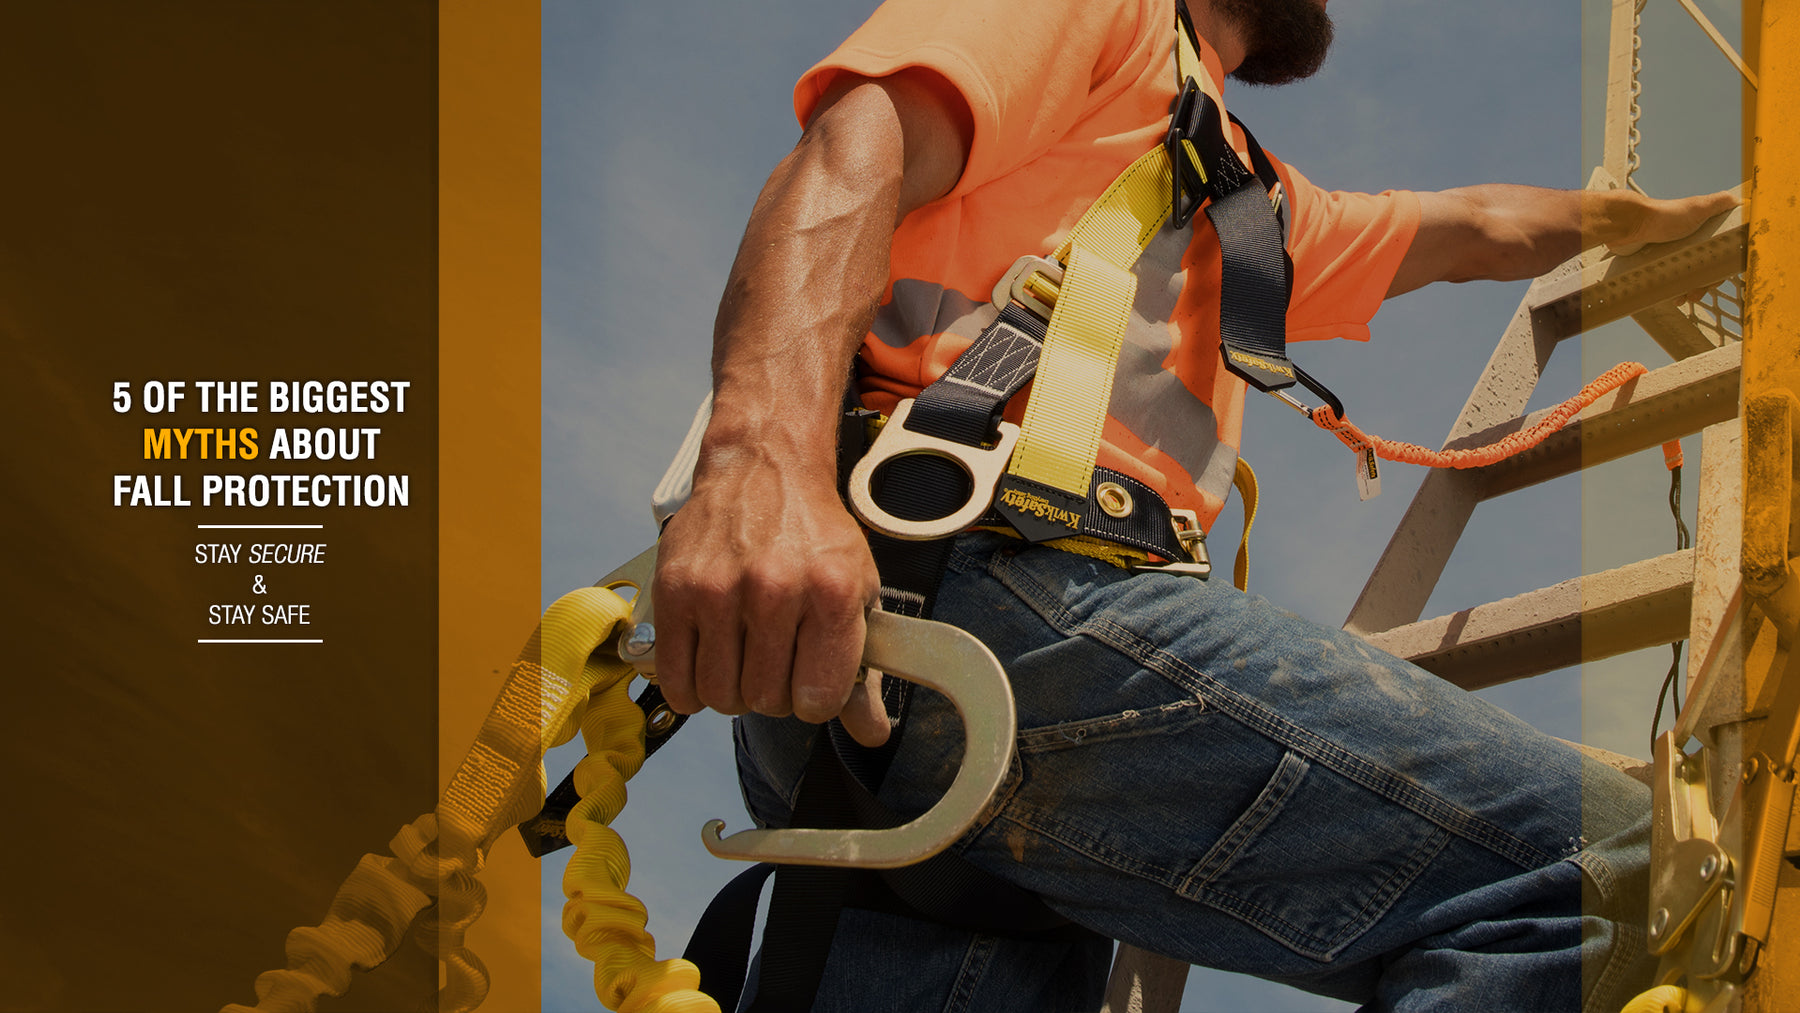 5 of the Biggest Myths About Fall Protection